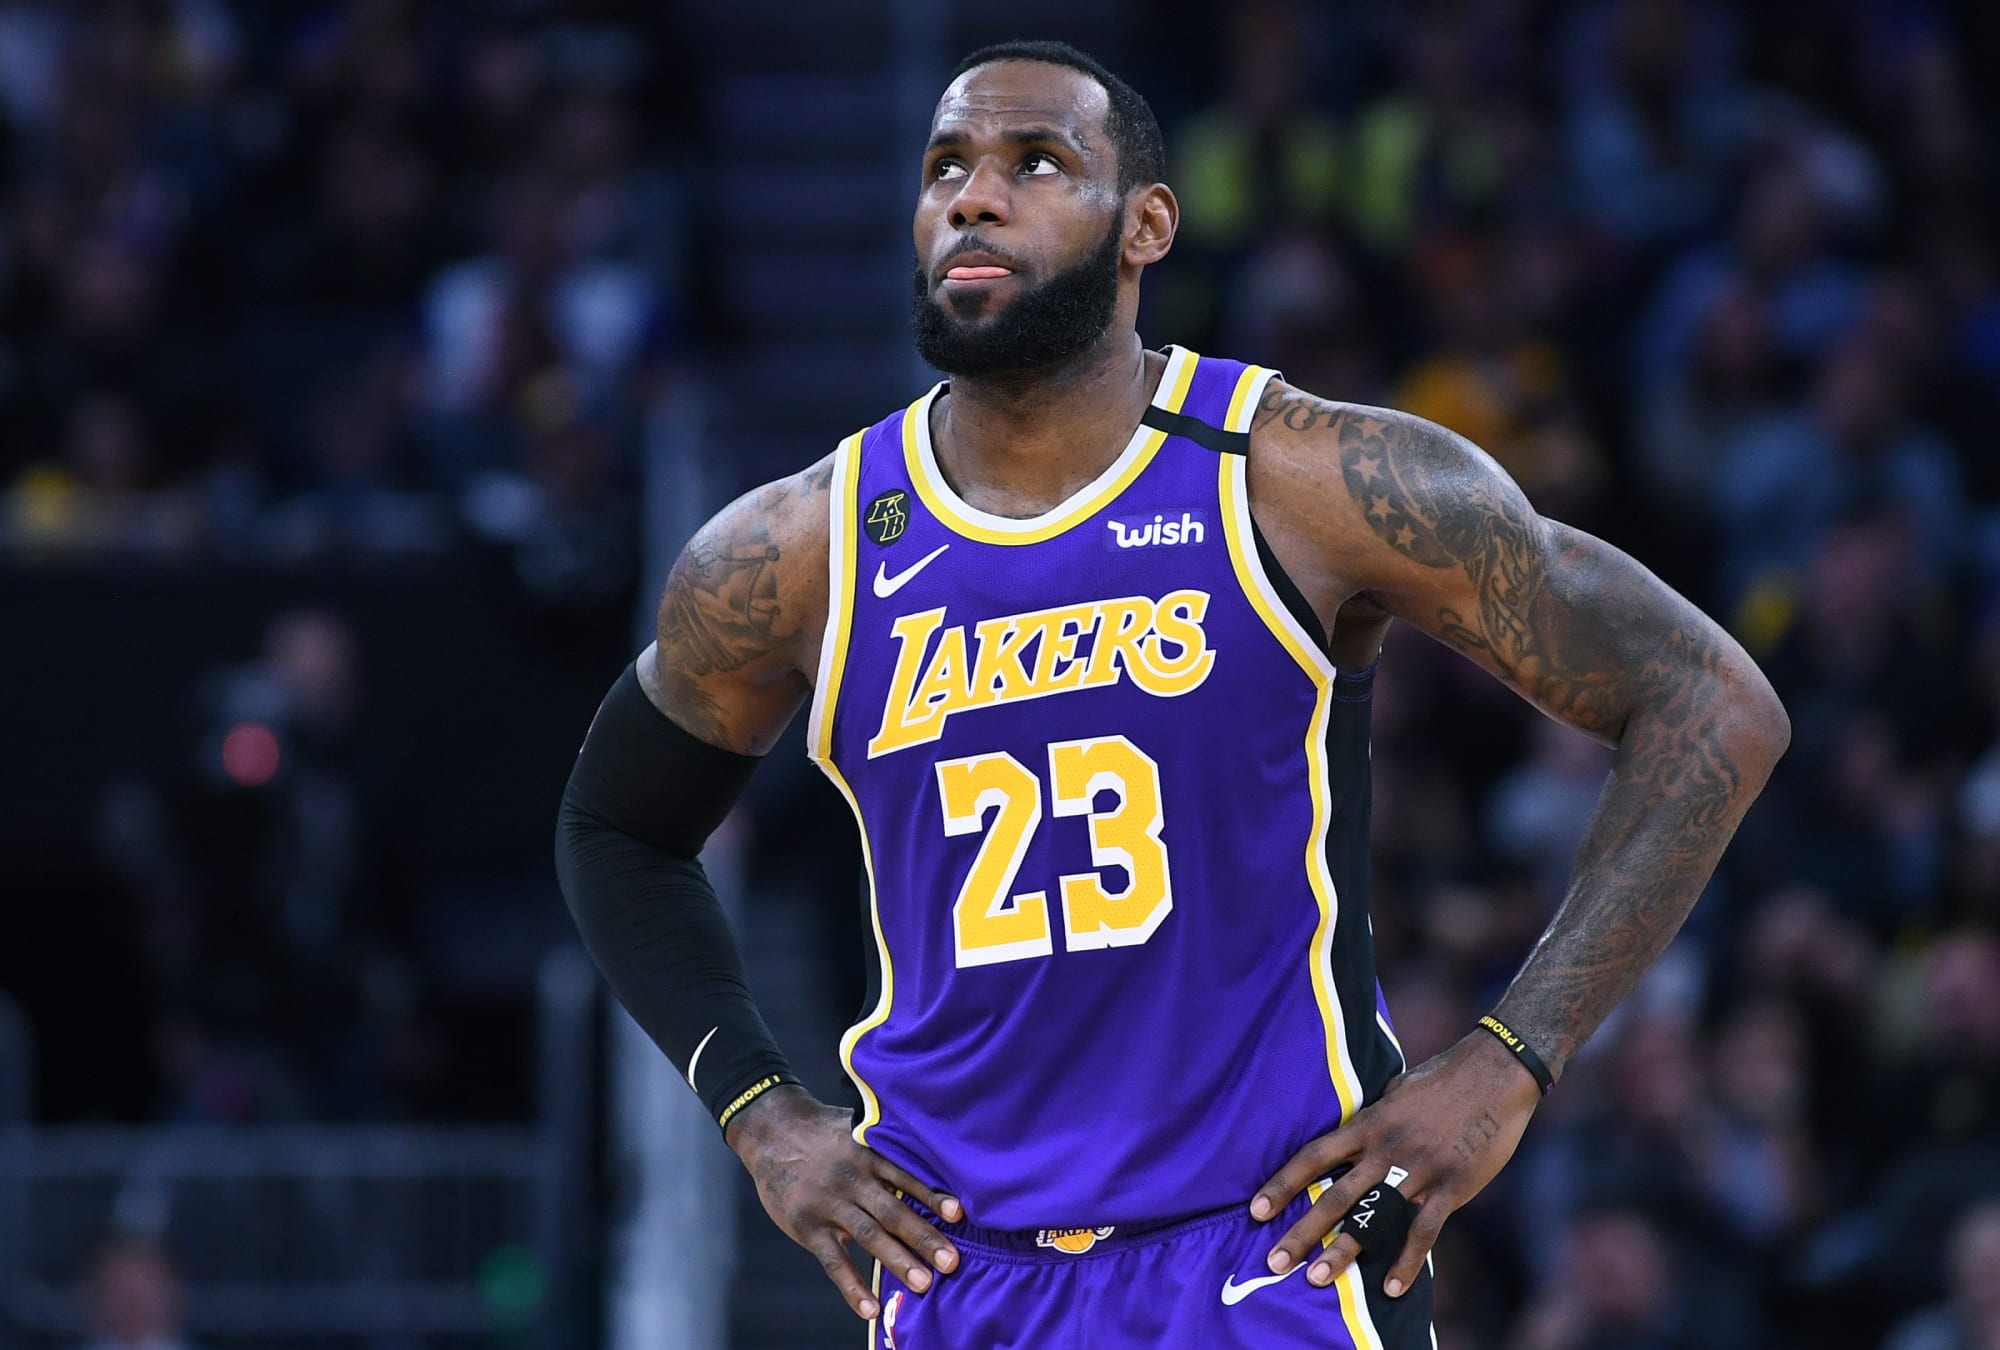 Lakers News: LeBron James Discusses What Winning 2019-20 NBA MVP Award  Would Mean To Him 